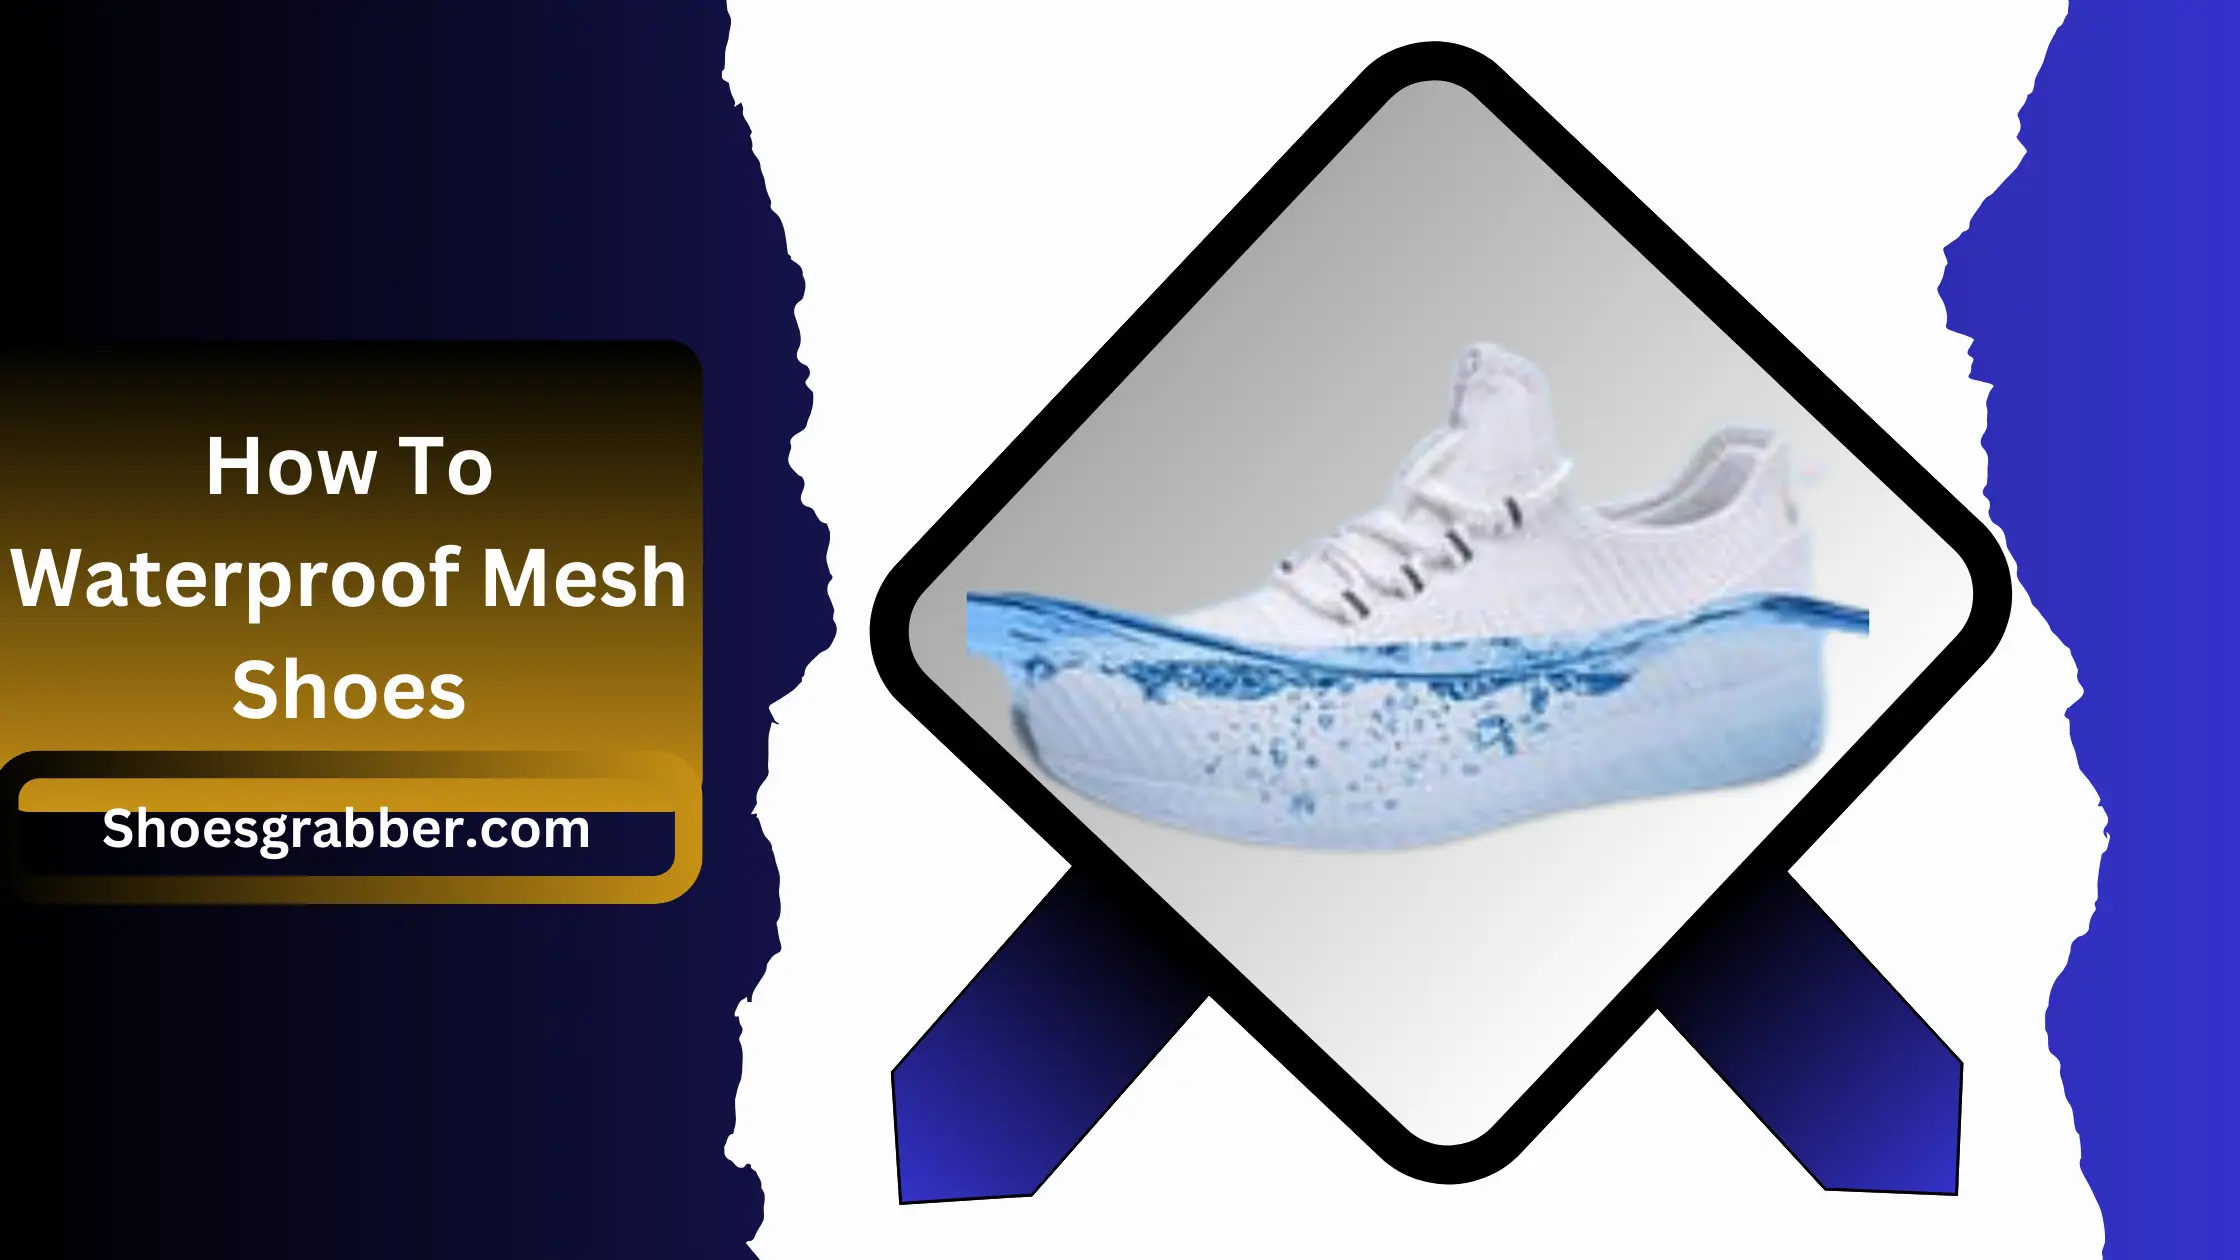 How To Waterproof Mesh Shoes - A Step-By-Step Guide